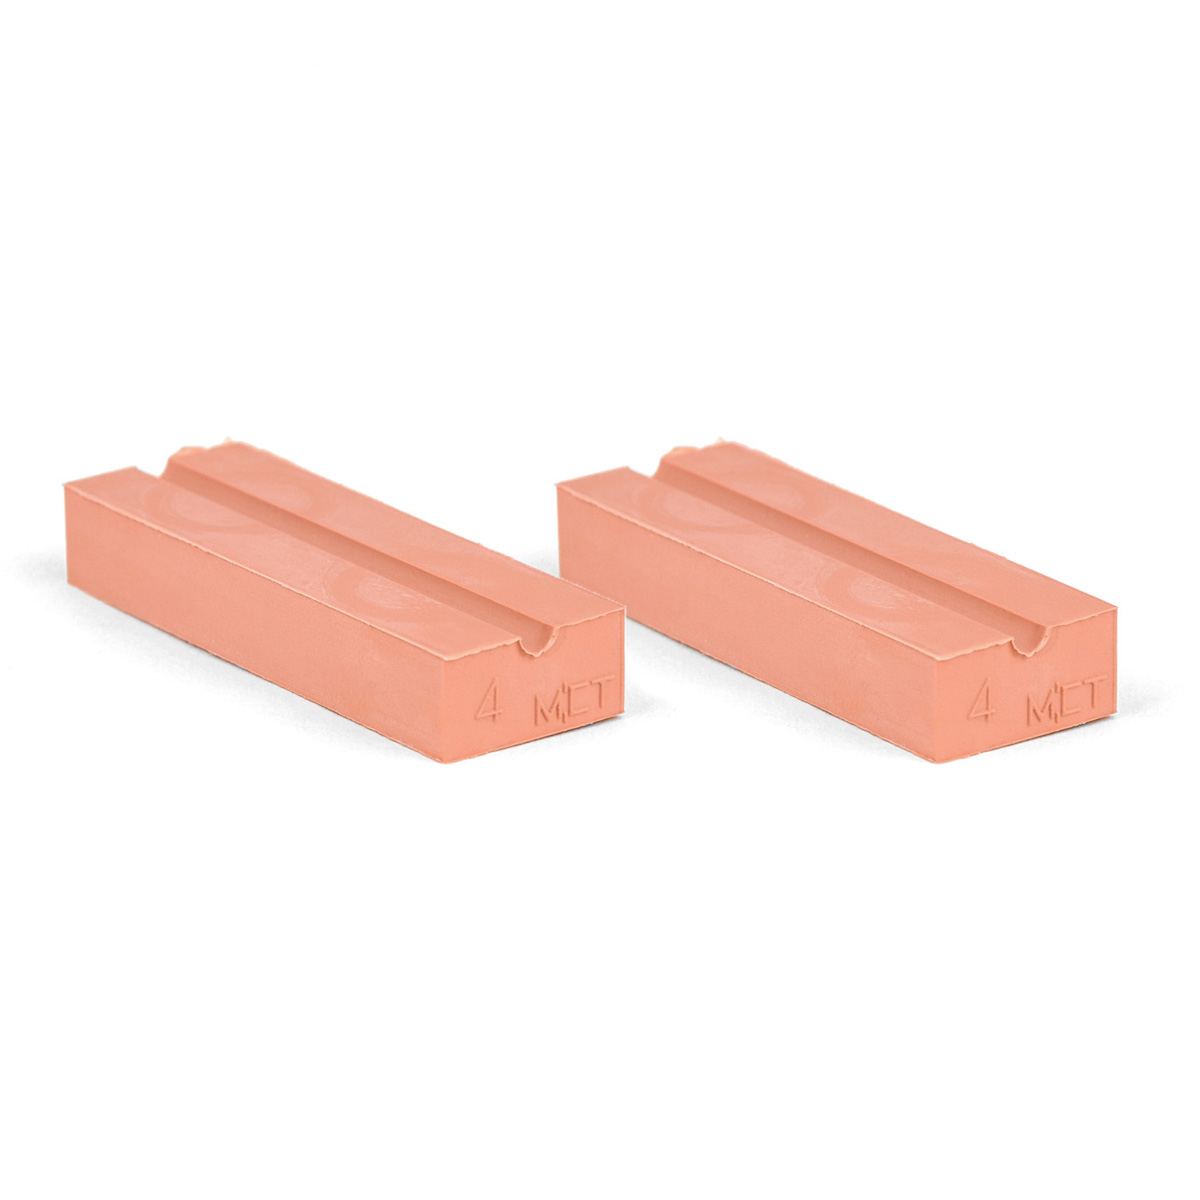 20-04*2 Set of 2 half insert block lycron, 20-04 for cable/pipe diam. 3.5-4.5mm